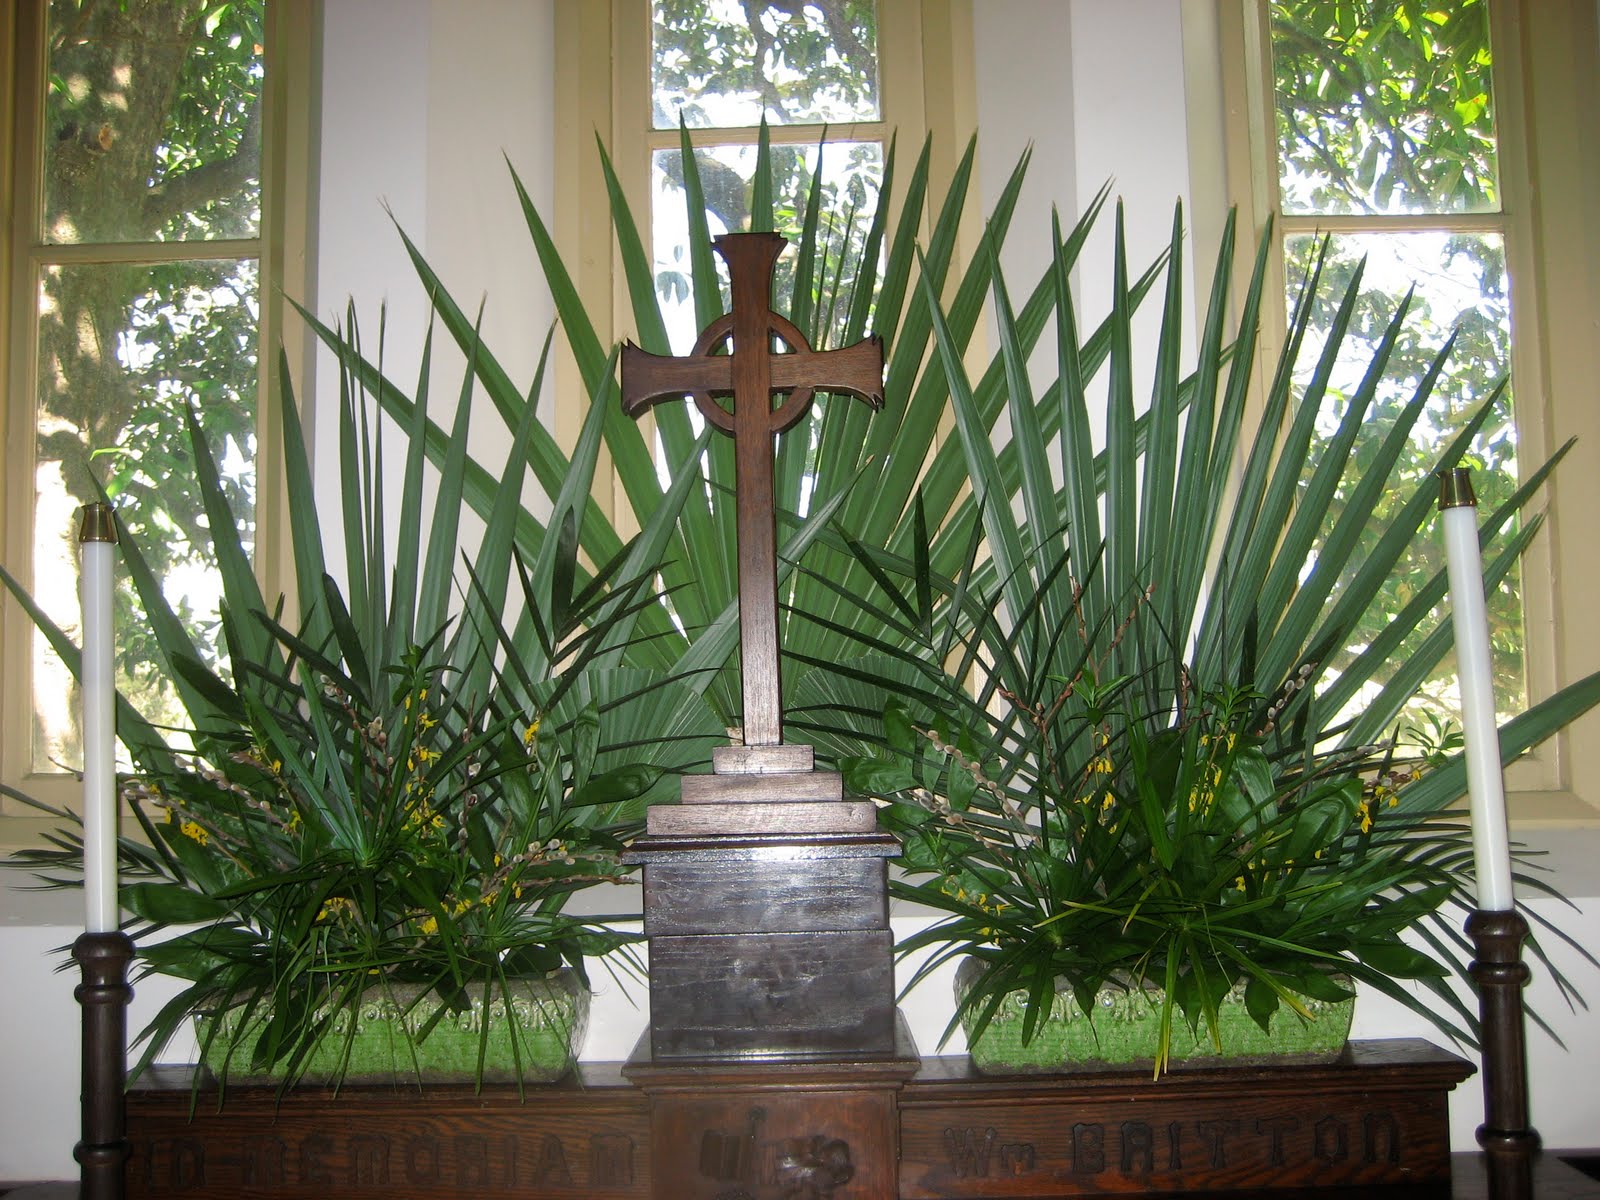 The Chapel of the Cross Flower Guild: Palm Sunday - March 28, 2010